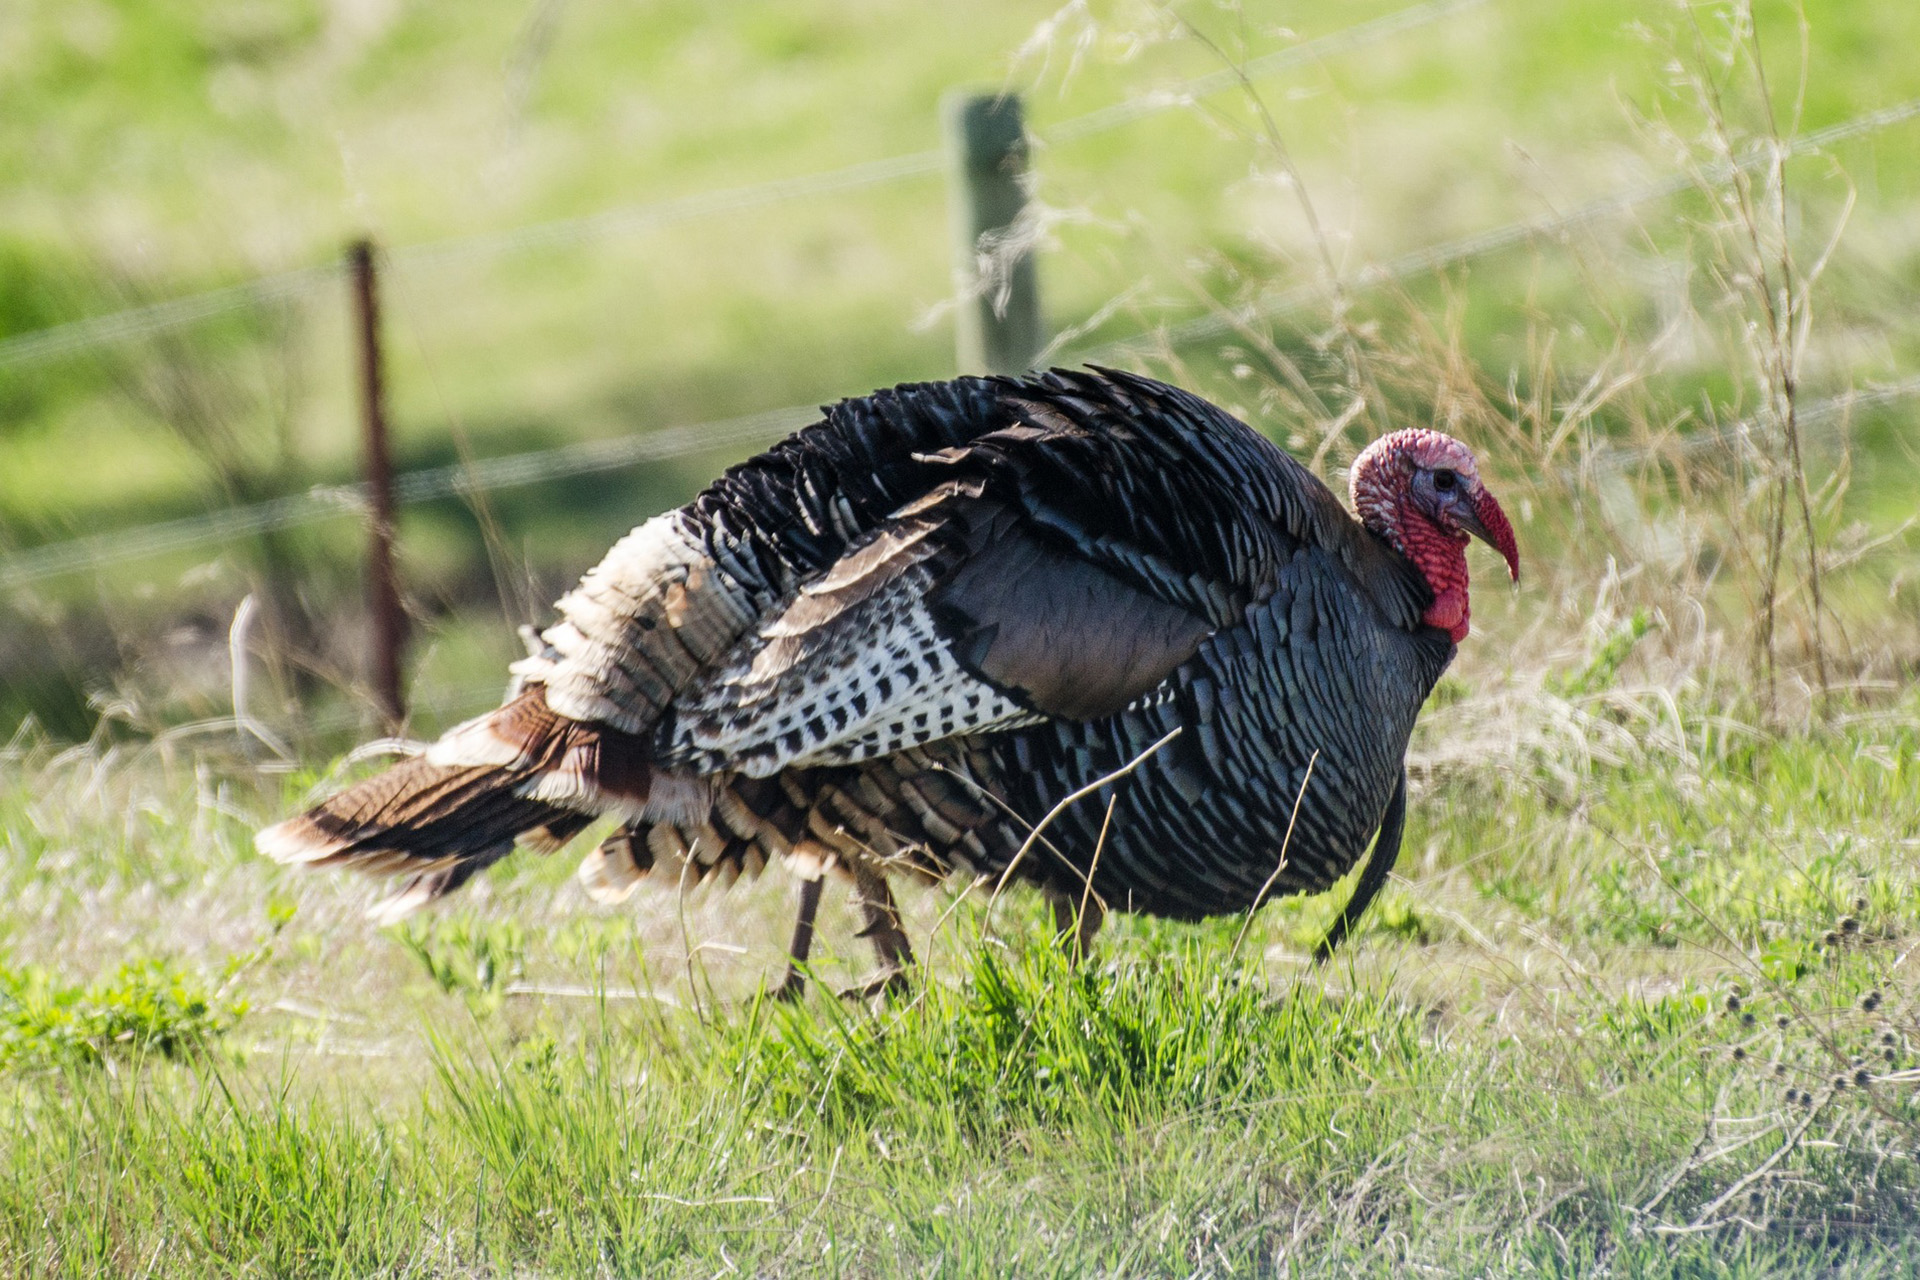 By managing wild turkey habitat, landowners will improve the density and health of the population and ensure these incredible birds stick around for years to come.